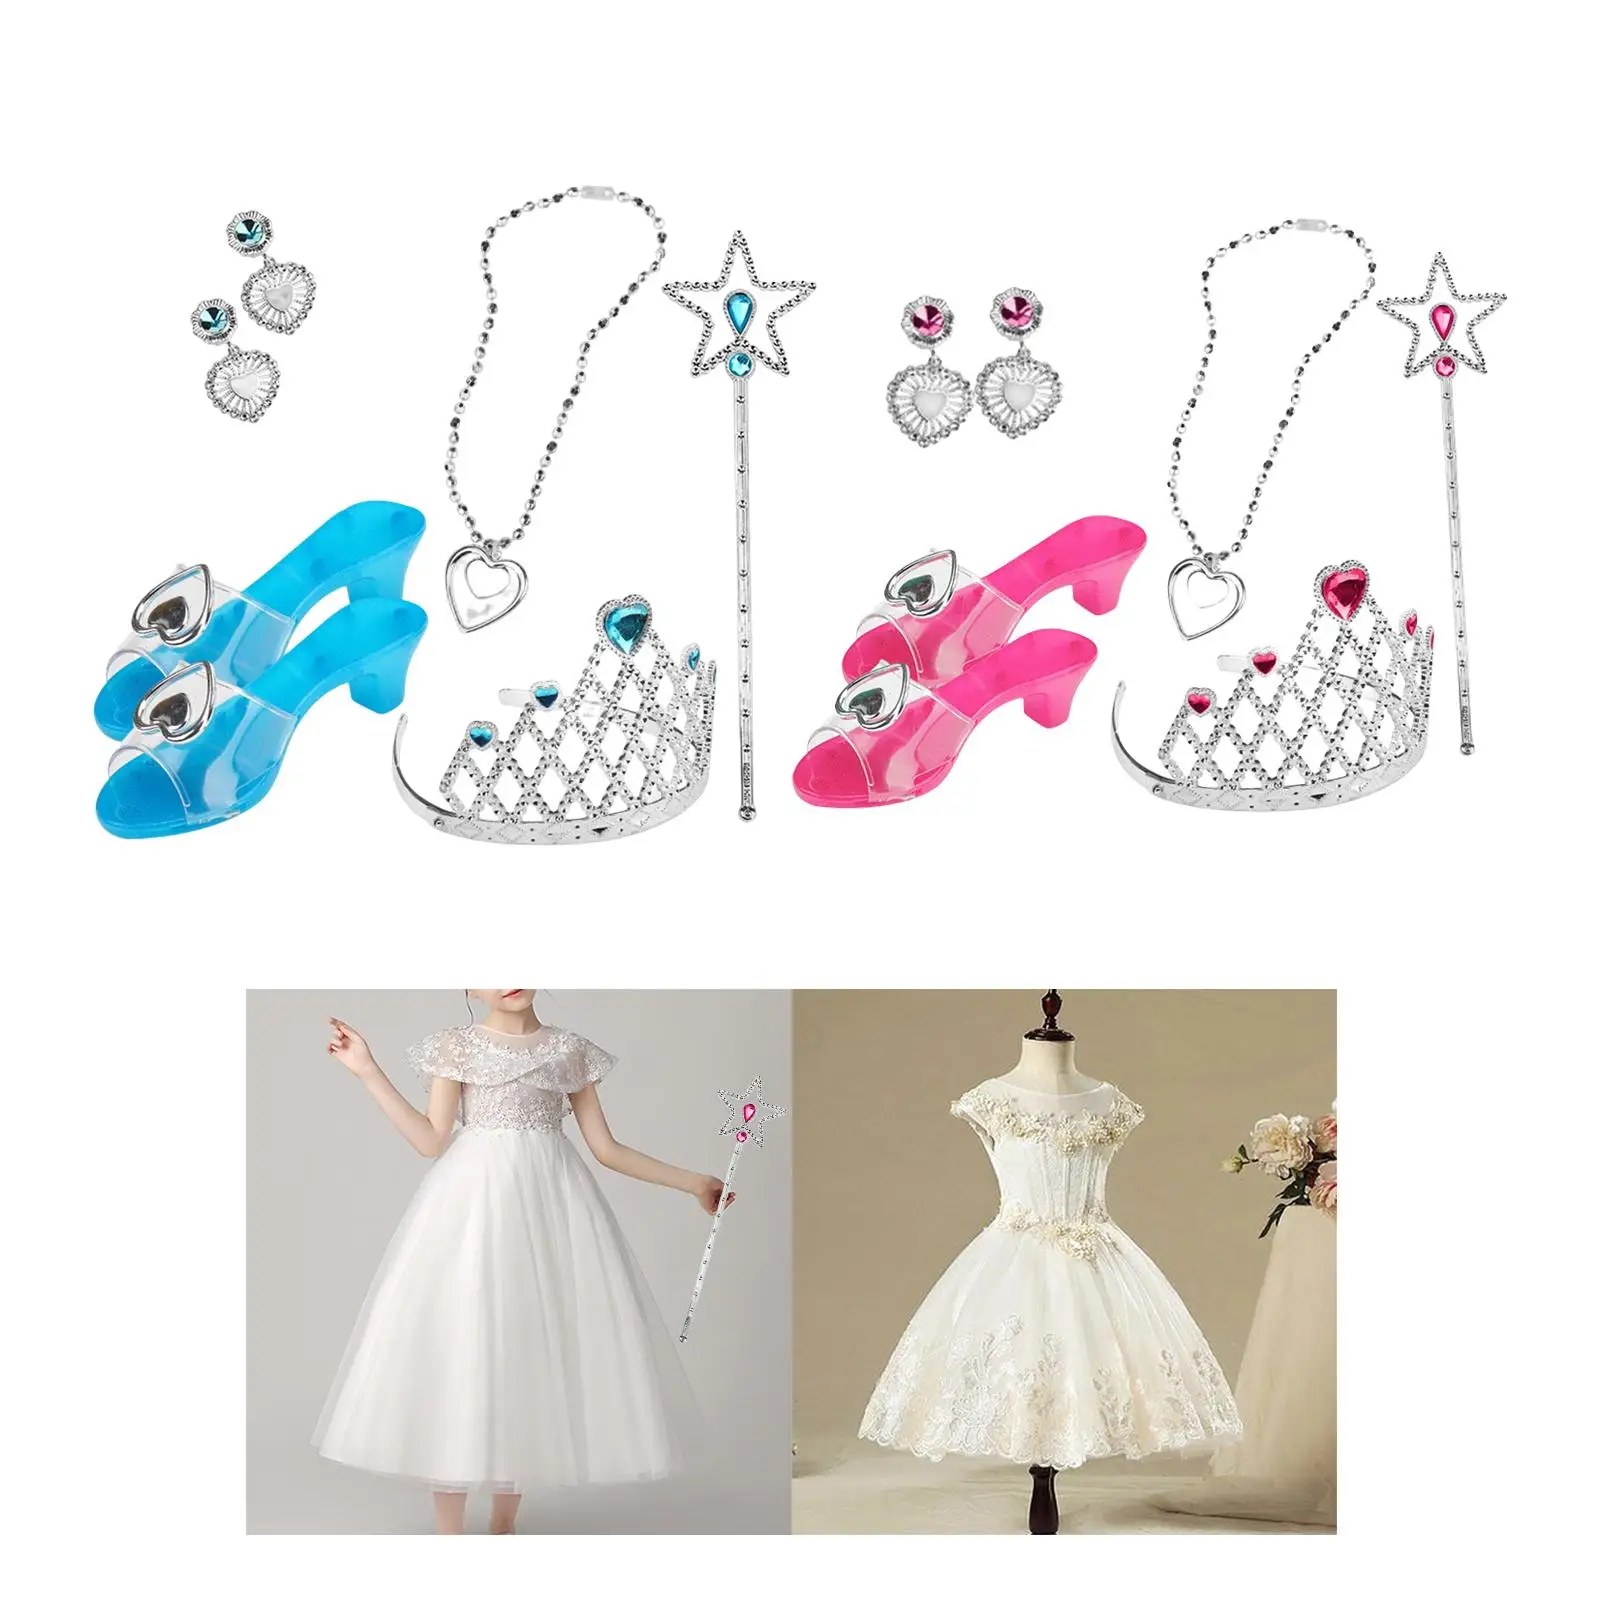 7Pcs Little Girls Jewelry Toy Princess Toys pole Girls Role Play Set Shoes crowns Princess Dress up for Game Birthday Party